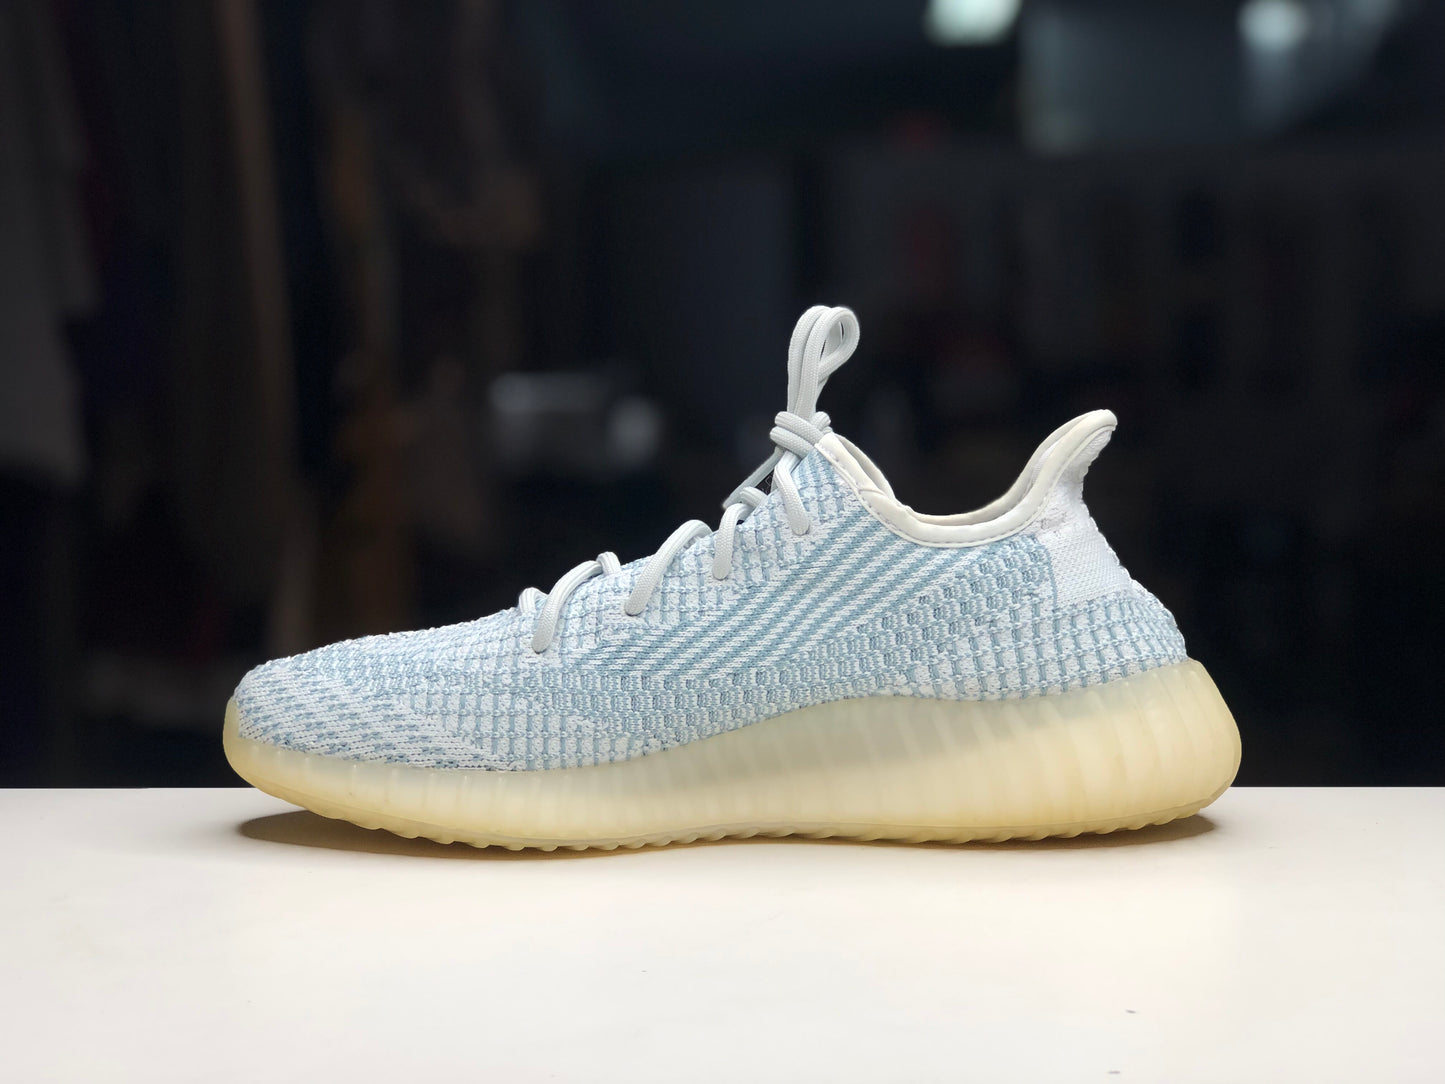 Adidas Yeezy Boost 350 V2 Cloud White (Reflective) Size 11